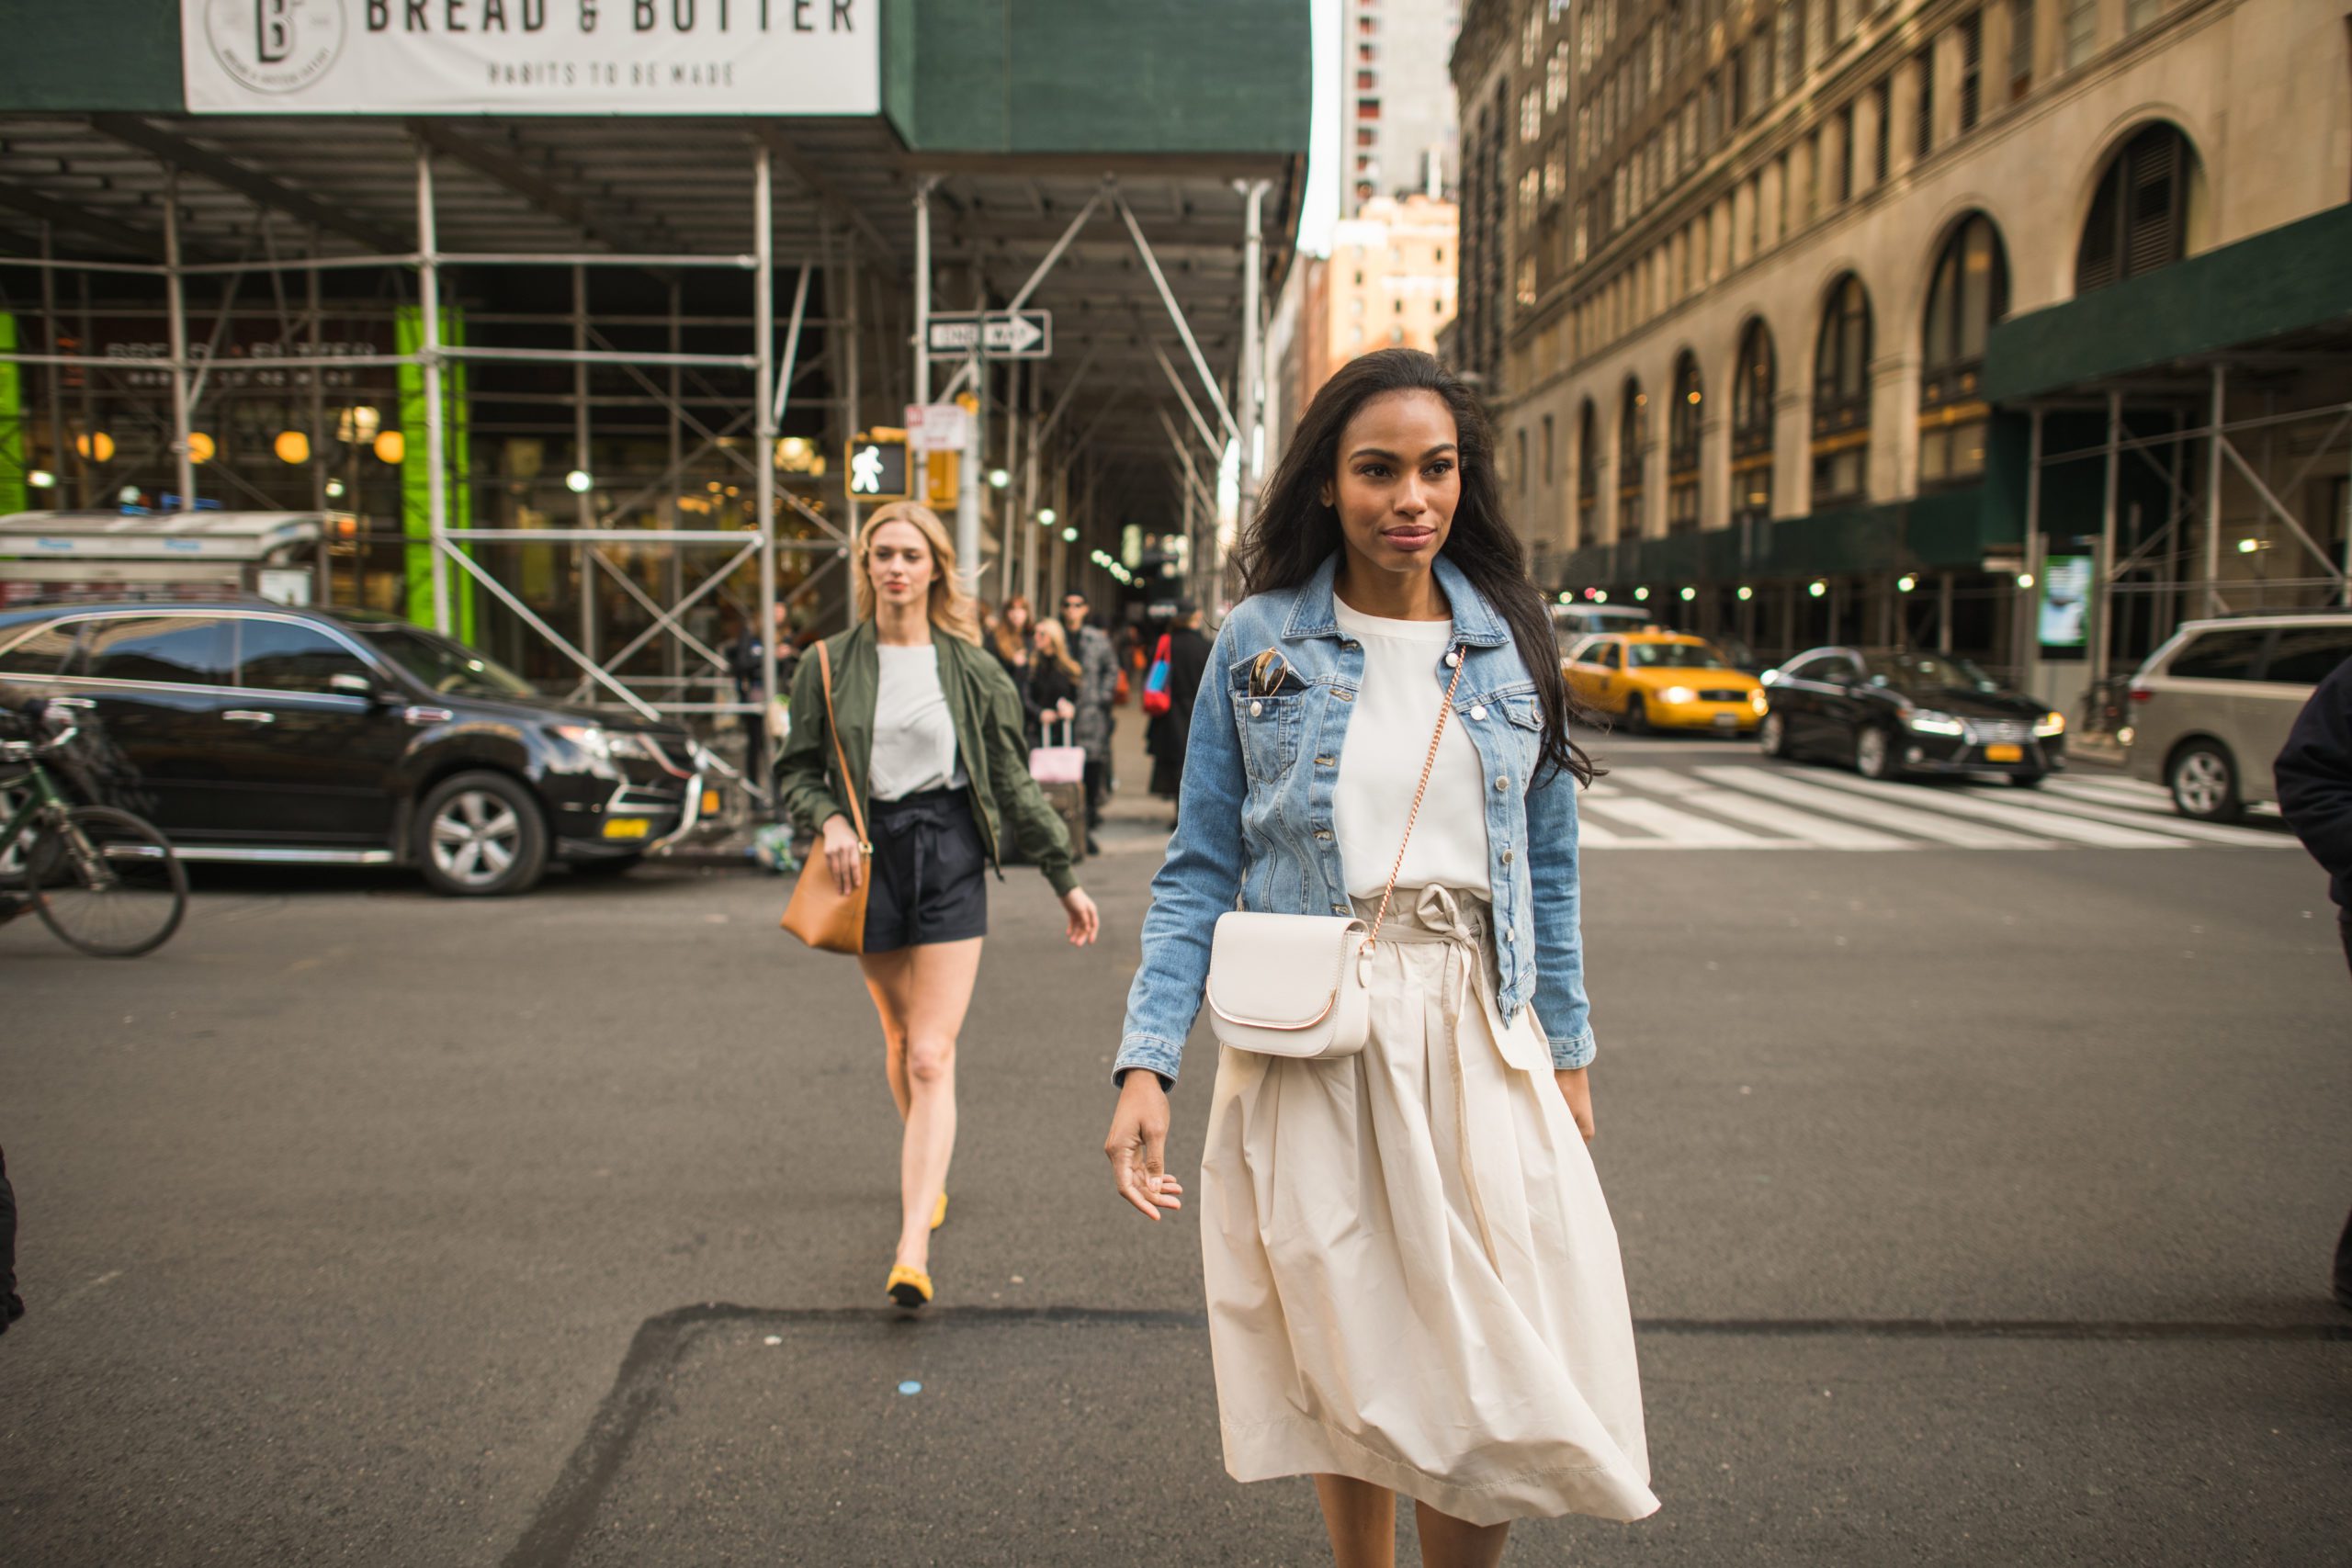 Haute House Theorie and Sedu Two women crossing the street in NYC